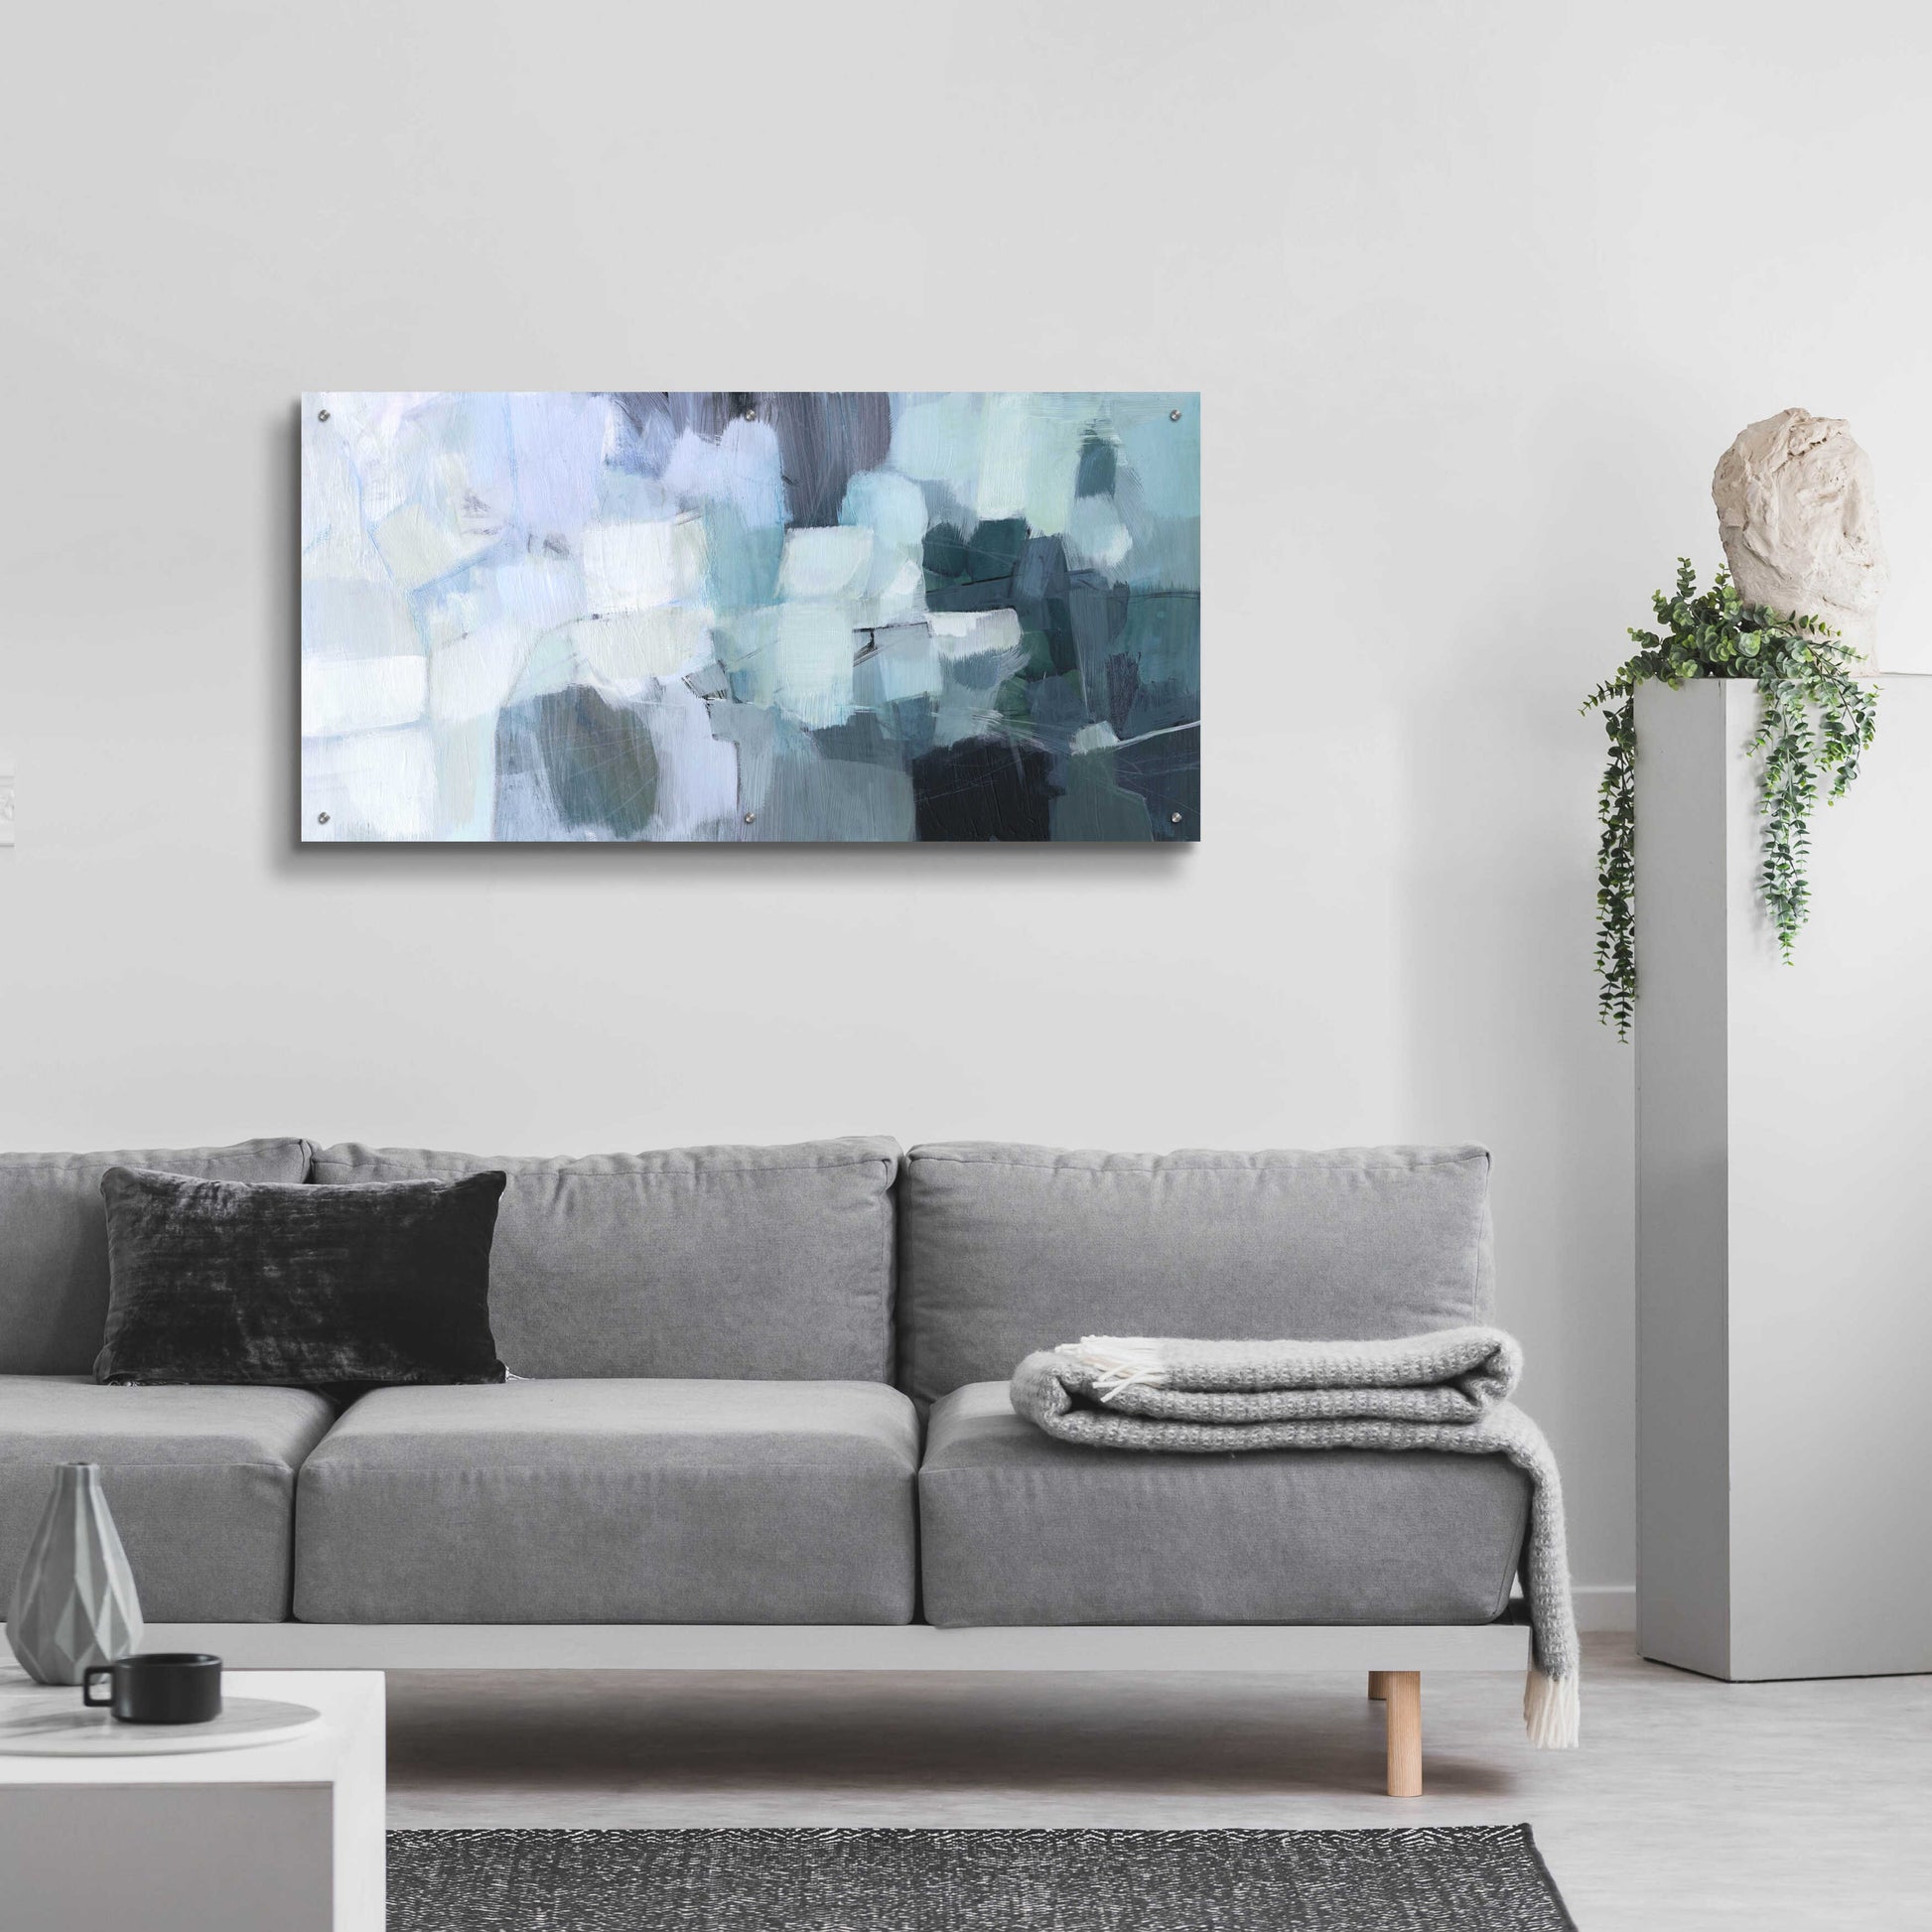 Epic Art 'Blue Deluge II' by Victoria Borges Acrylic Glass Wall Art,48x24